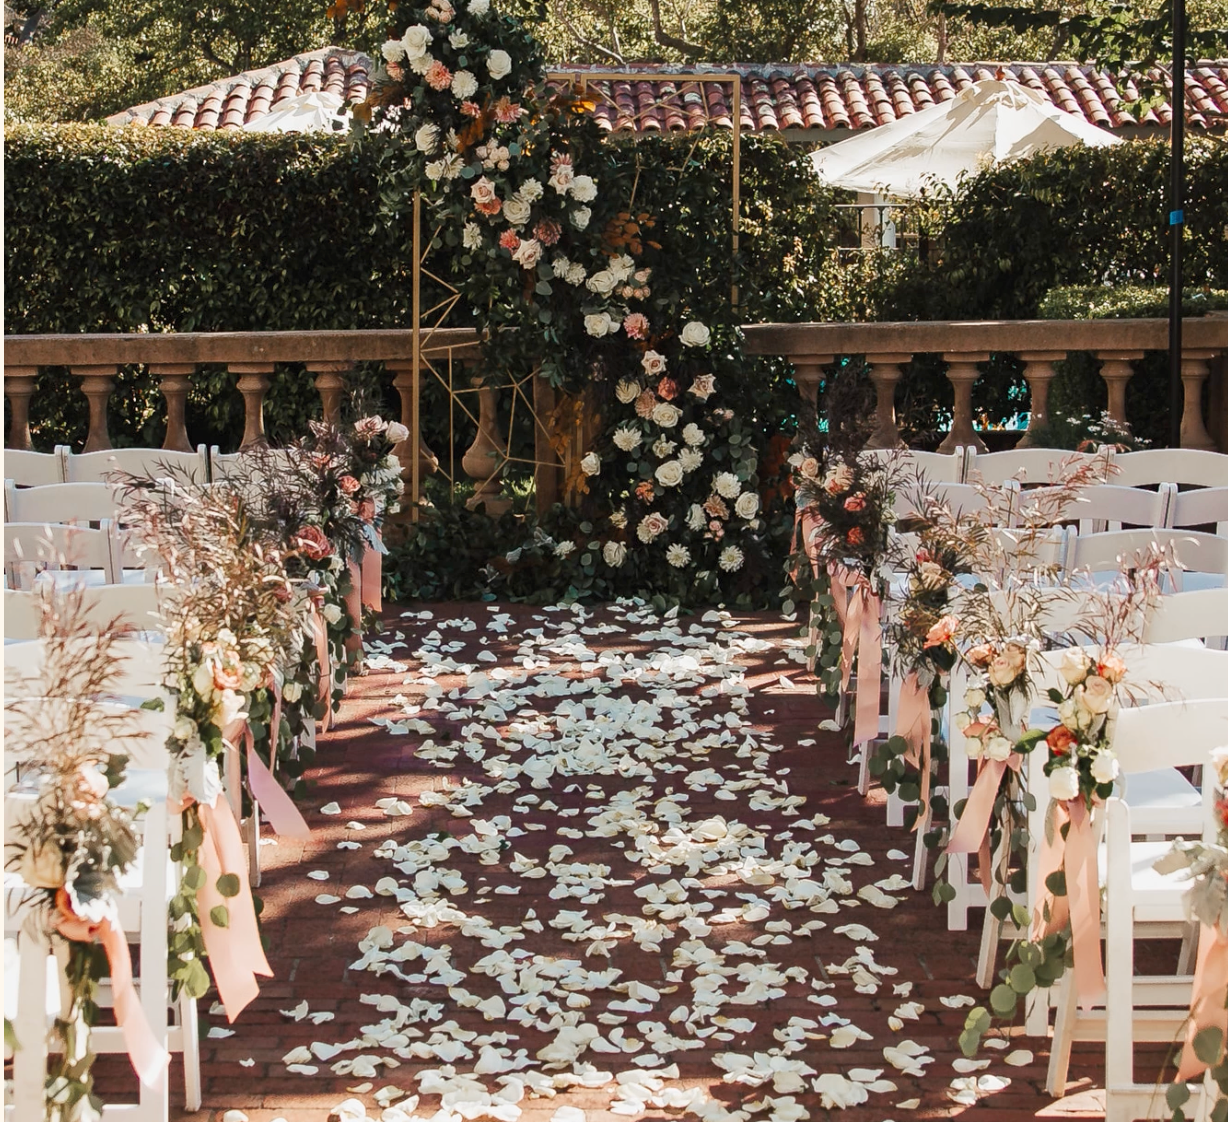 Wedding ceremony set up with aisle rose petals and dramatic rose covered arch